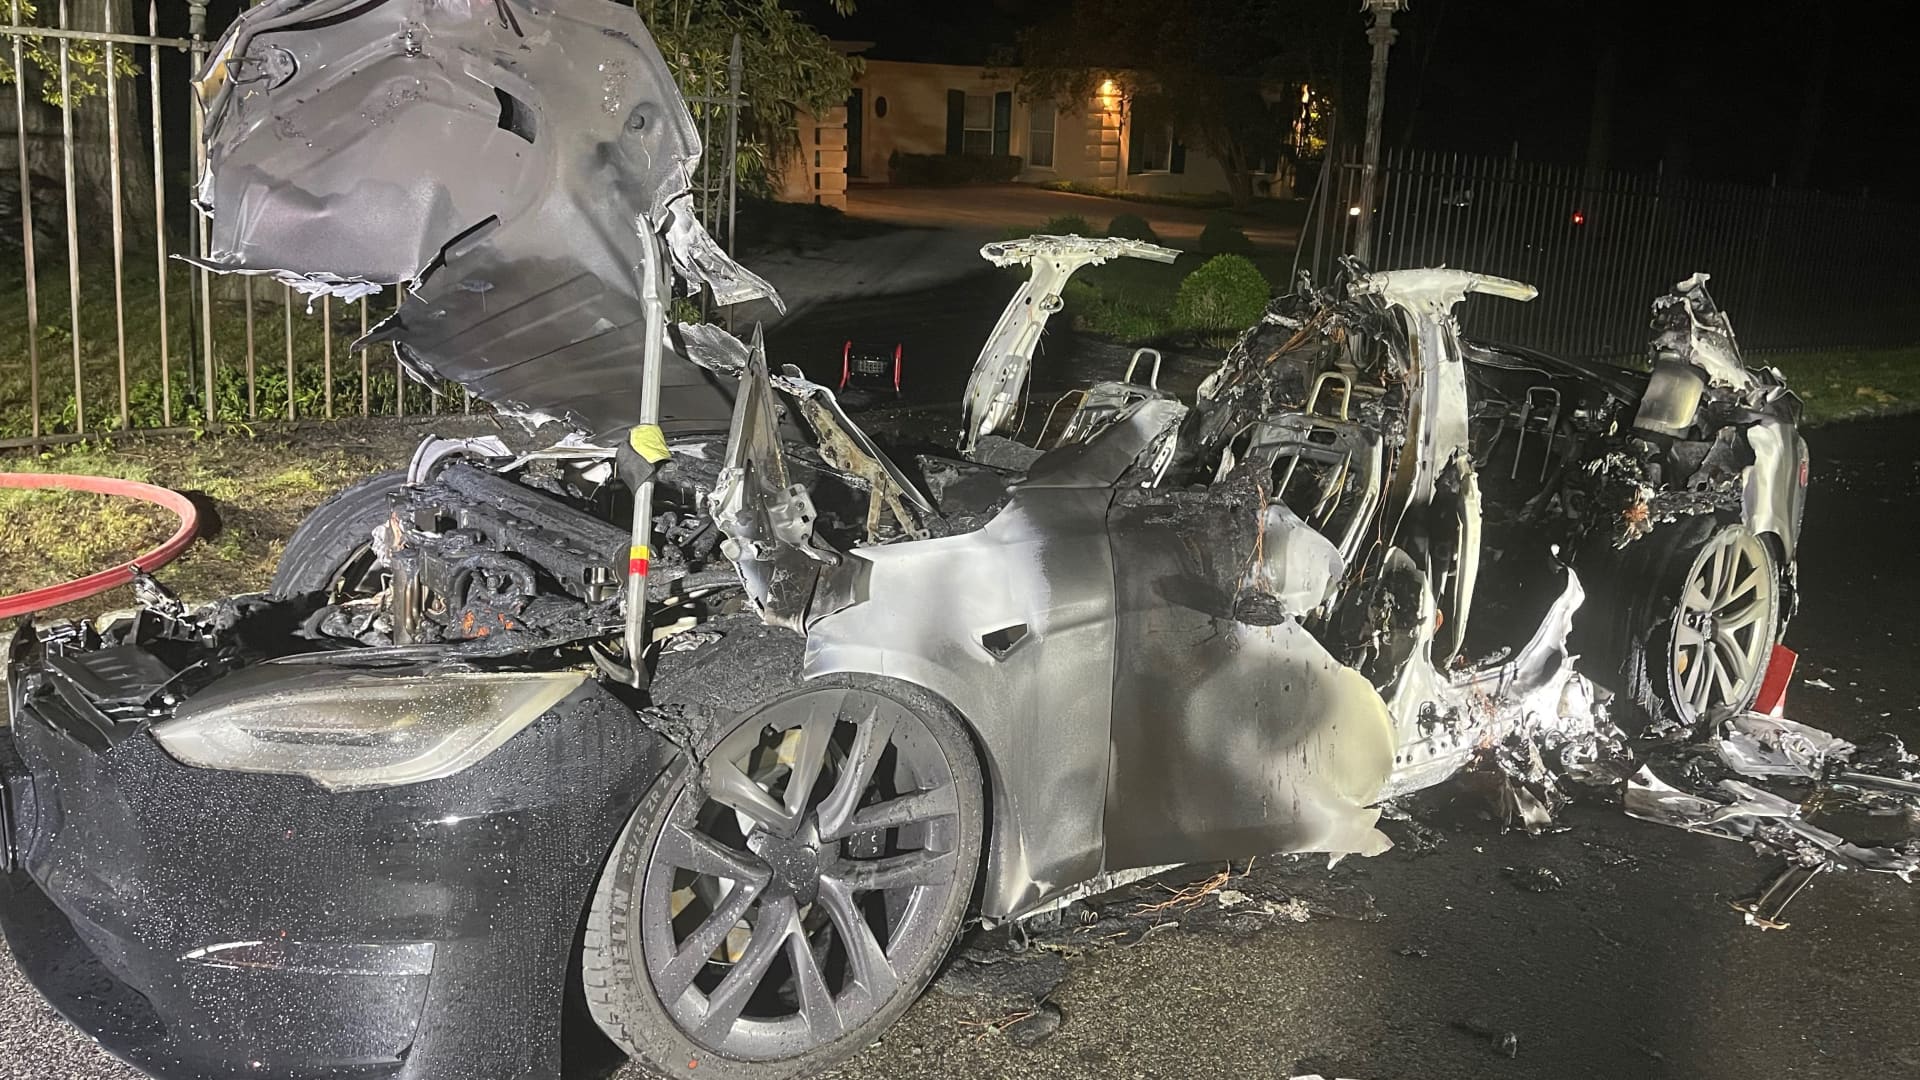 This Tesla Model S Plaid caught fire while the driver was at the wheel, according to a local fire department chief and attorneys representing the driver, on June 29, 2021, in Haverford, Pennsylvania